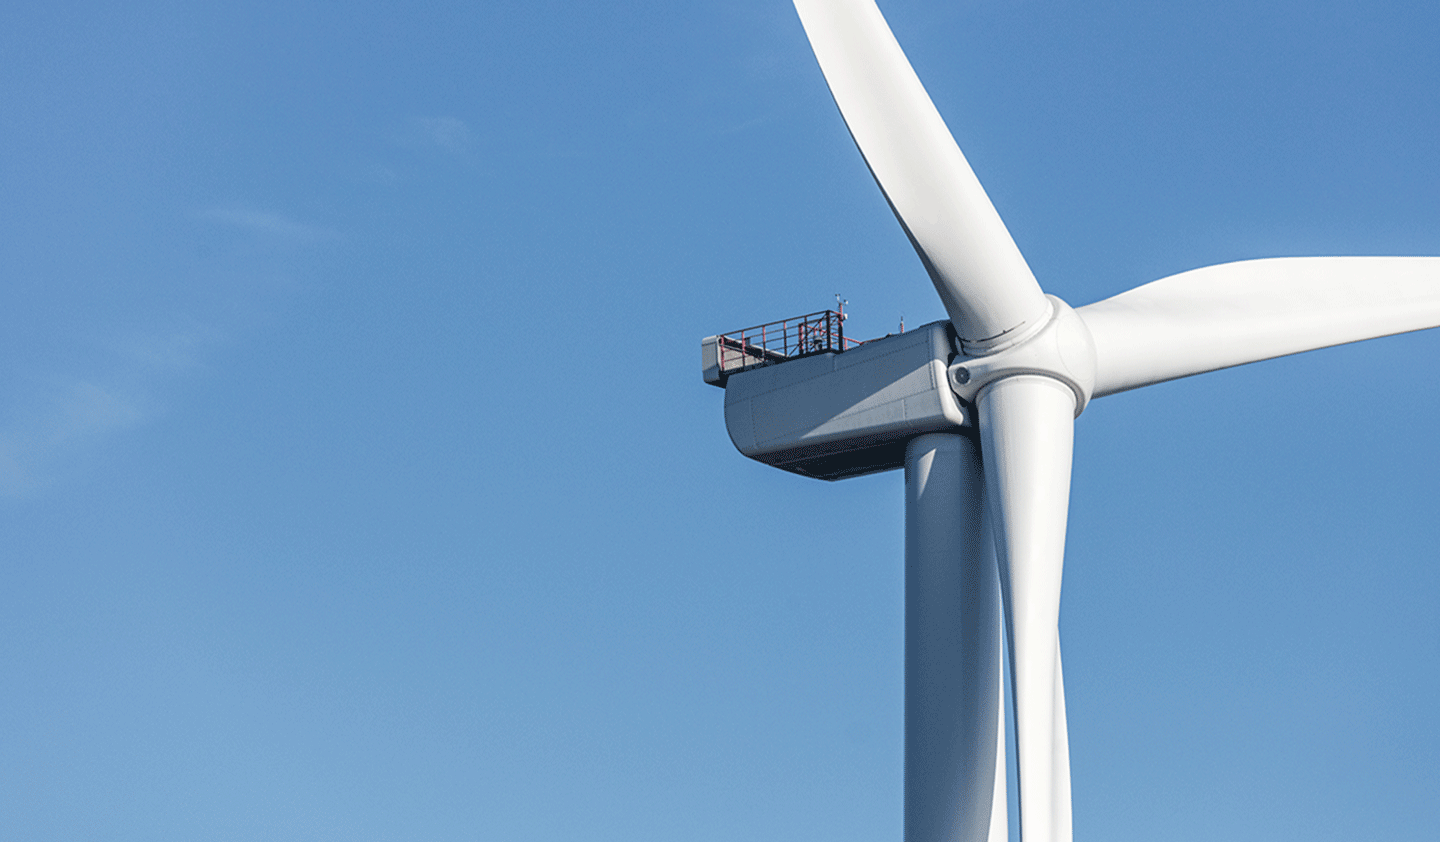 Wind turbine with a clear blue sky in the background.